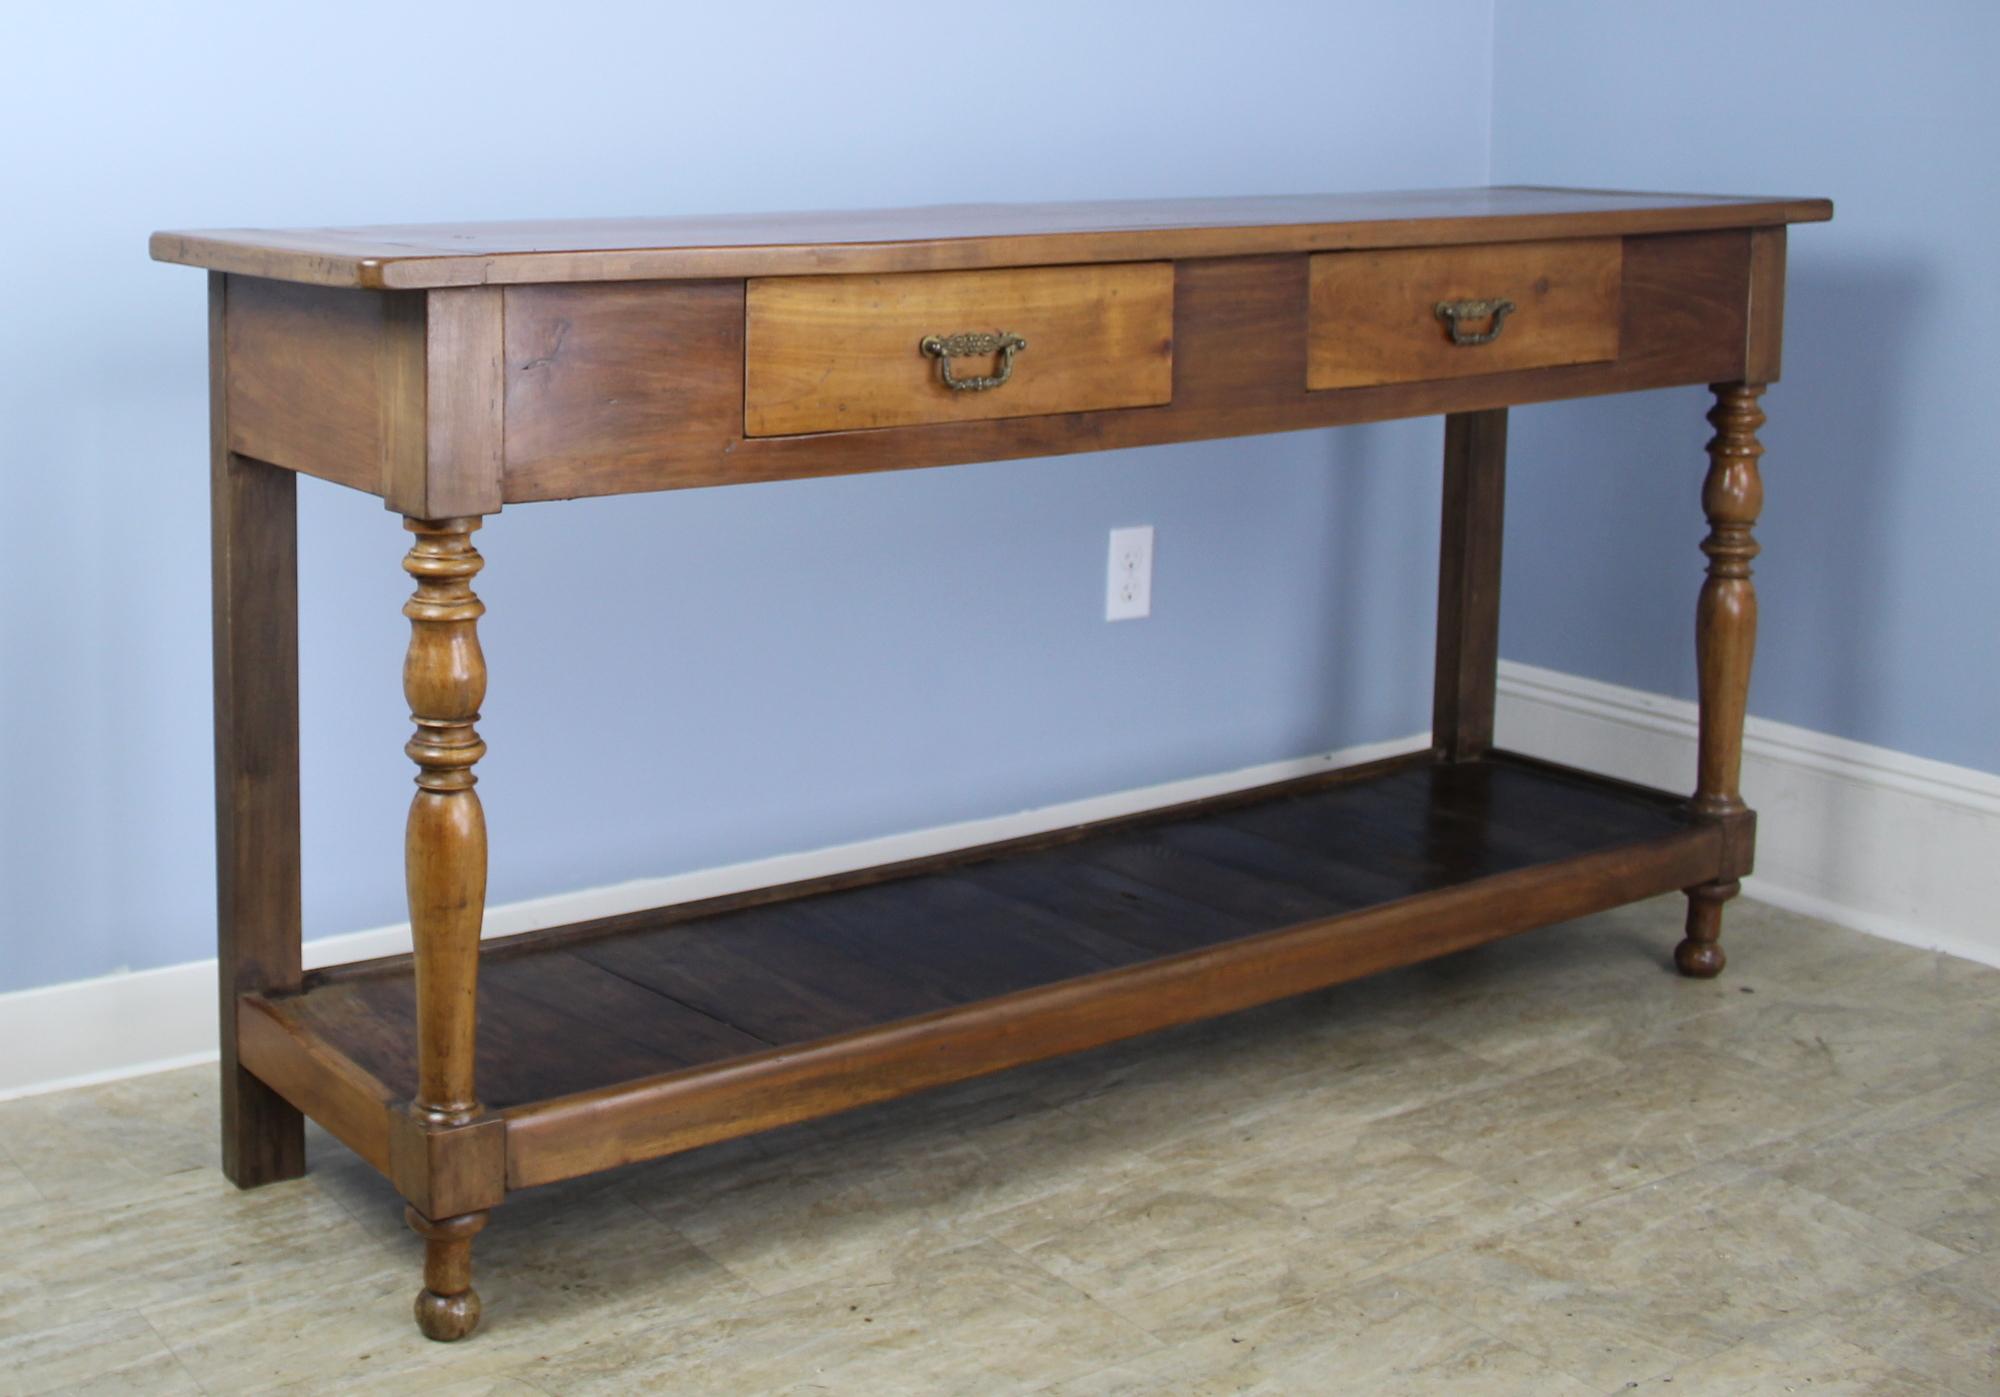 A lovely cherry potboard server, custom made for Briggs House in France with old legs, circa 1850. Generously proportioned with a thick top, two roomy drawers, and light mellow cherry color.